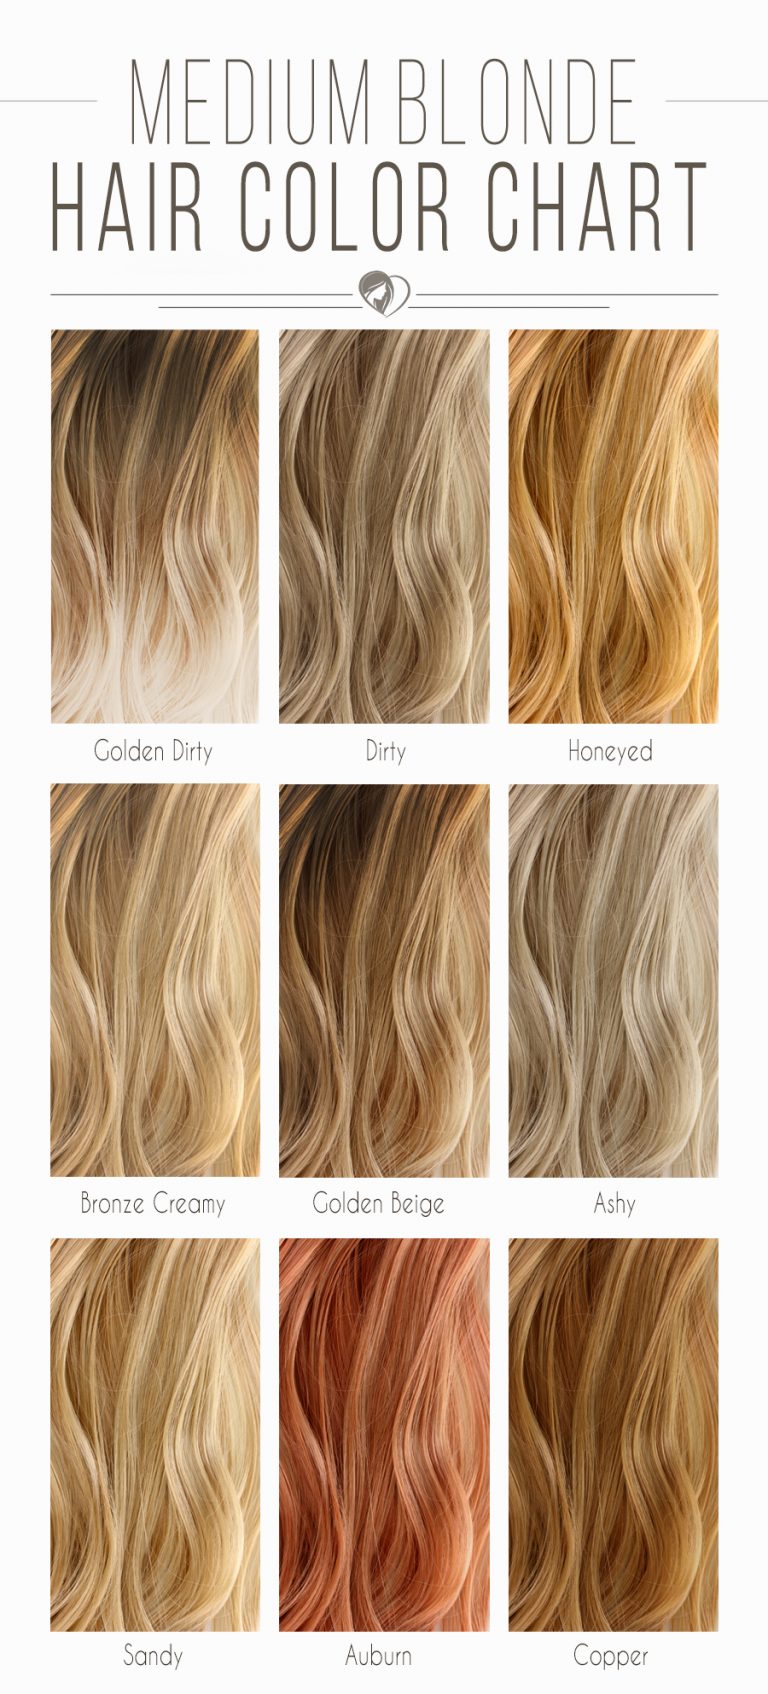 BLONDE HAIR COLOR CHART: THE SHADES KISSED BY THE SUN ...